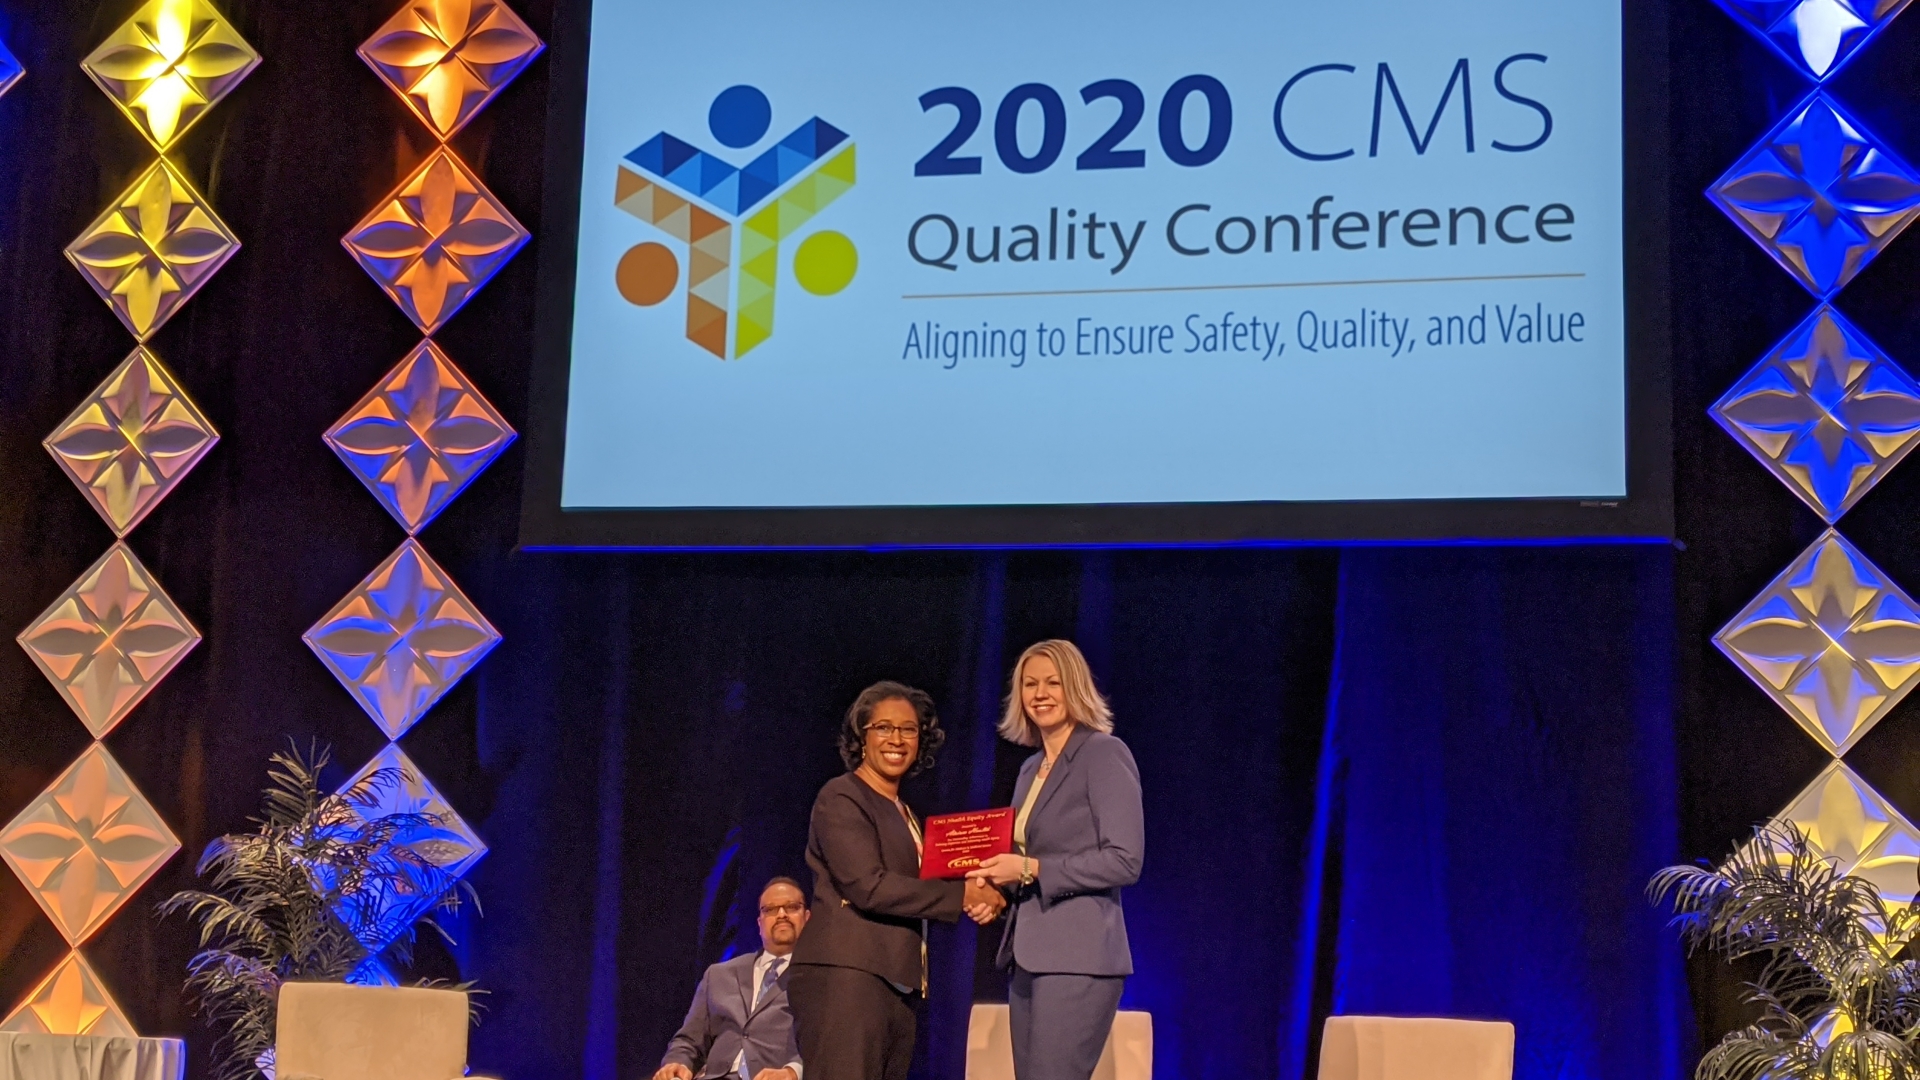 Atrium Health was recognized today by the Centers for Medicare & Medicaid Services (CMS) as a 2020 CMS Health Equity Award recipient for its dedication to health equity by reducing disparities, enabling communities to achieve the highest level of health. 